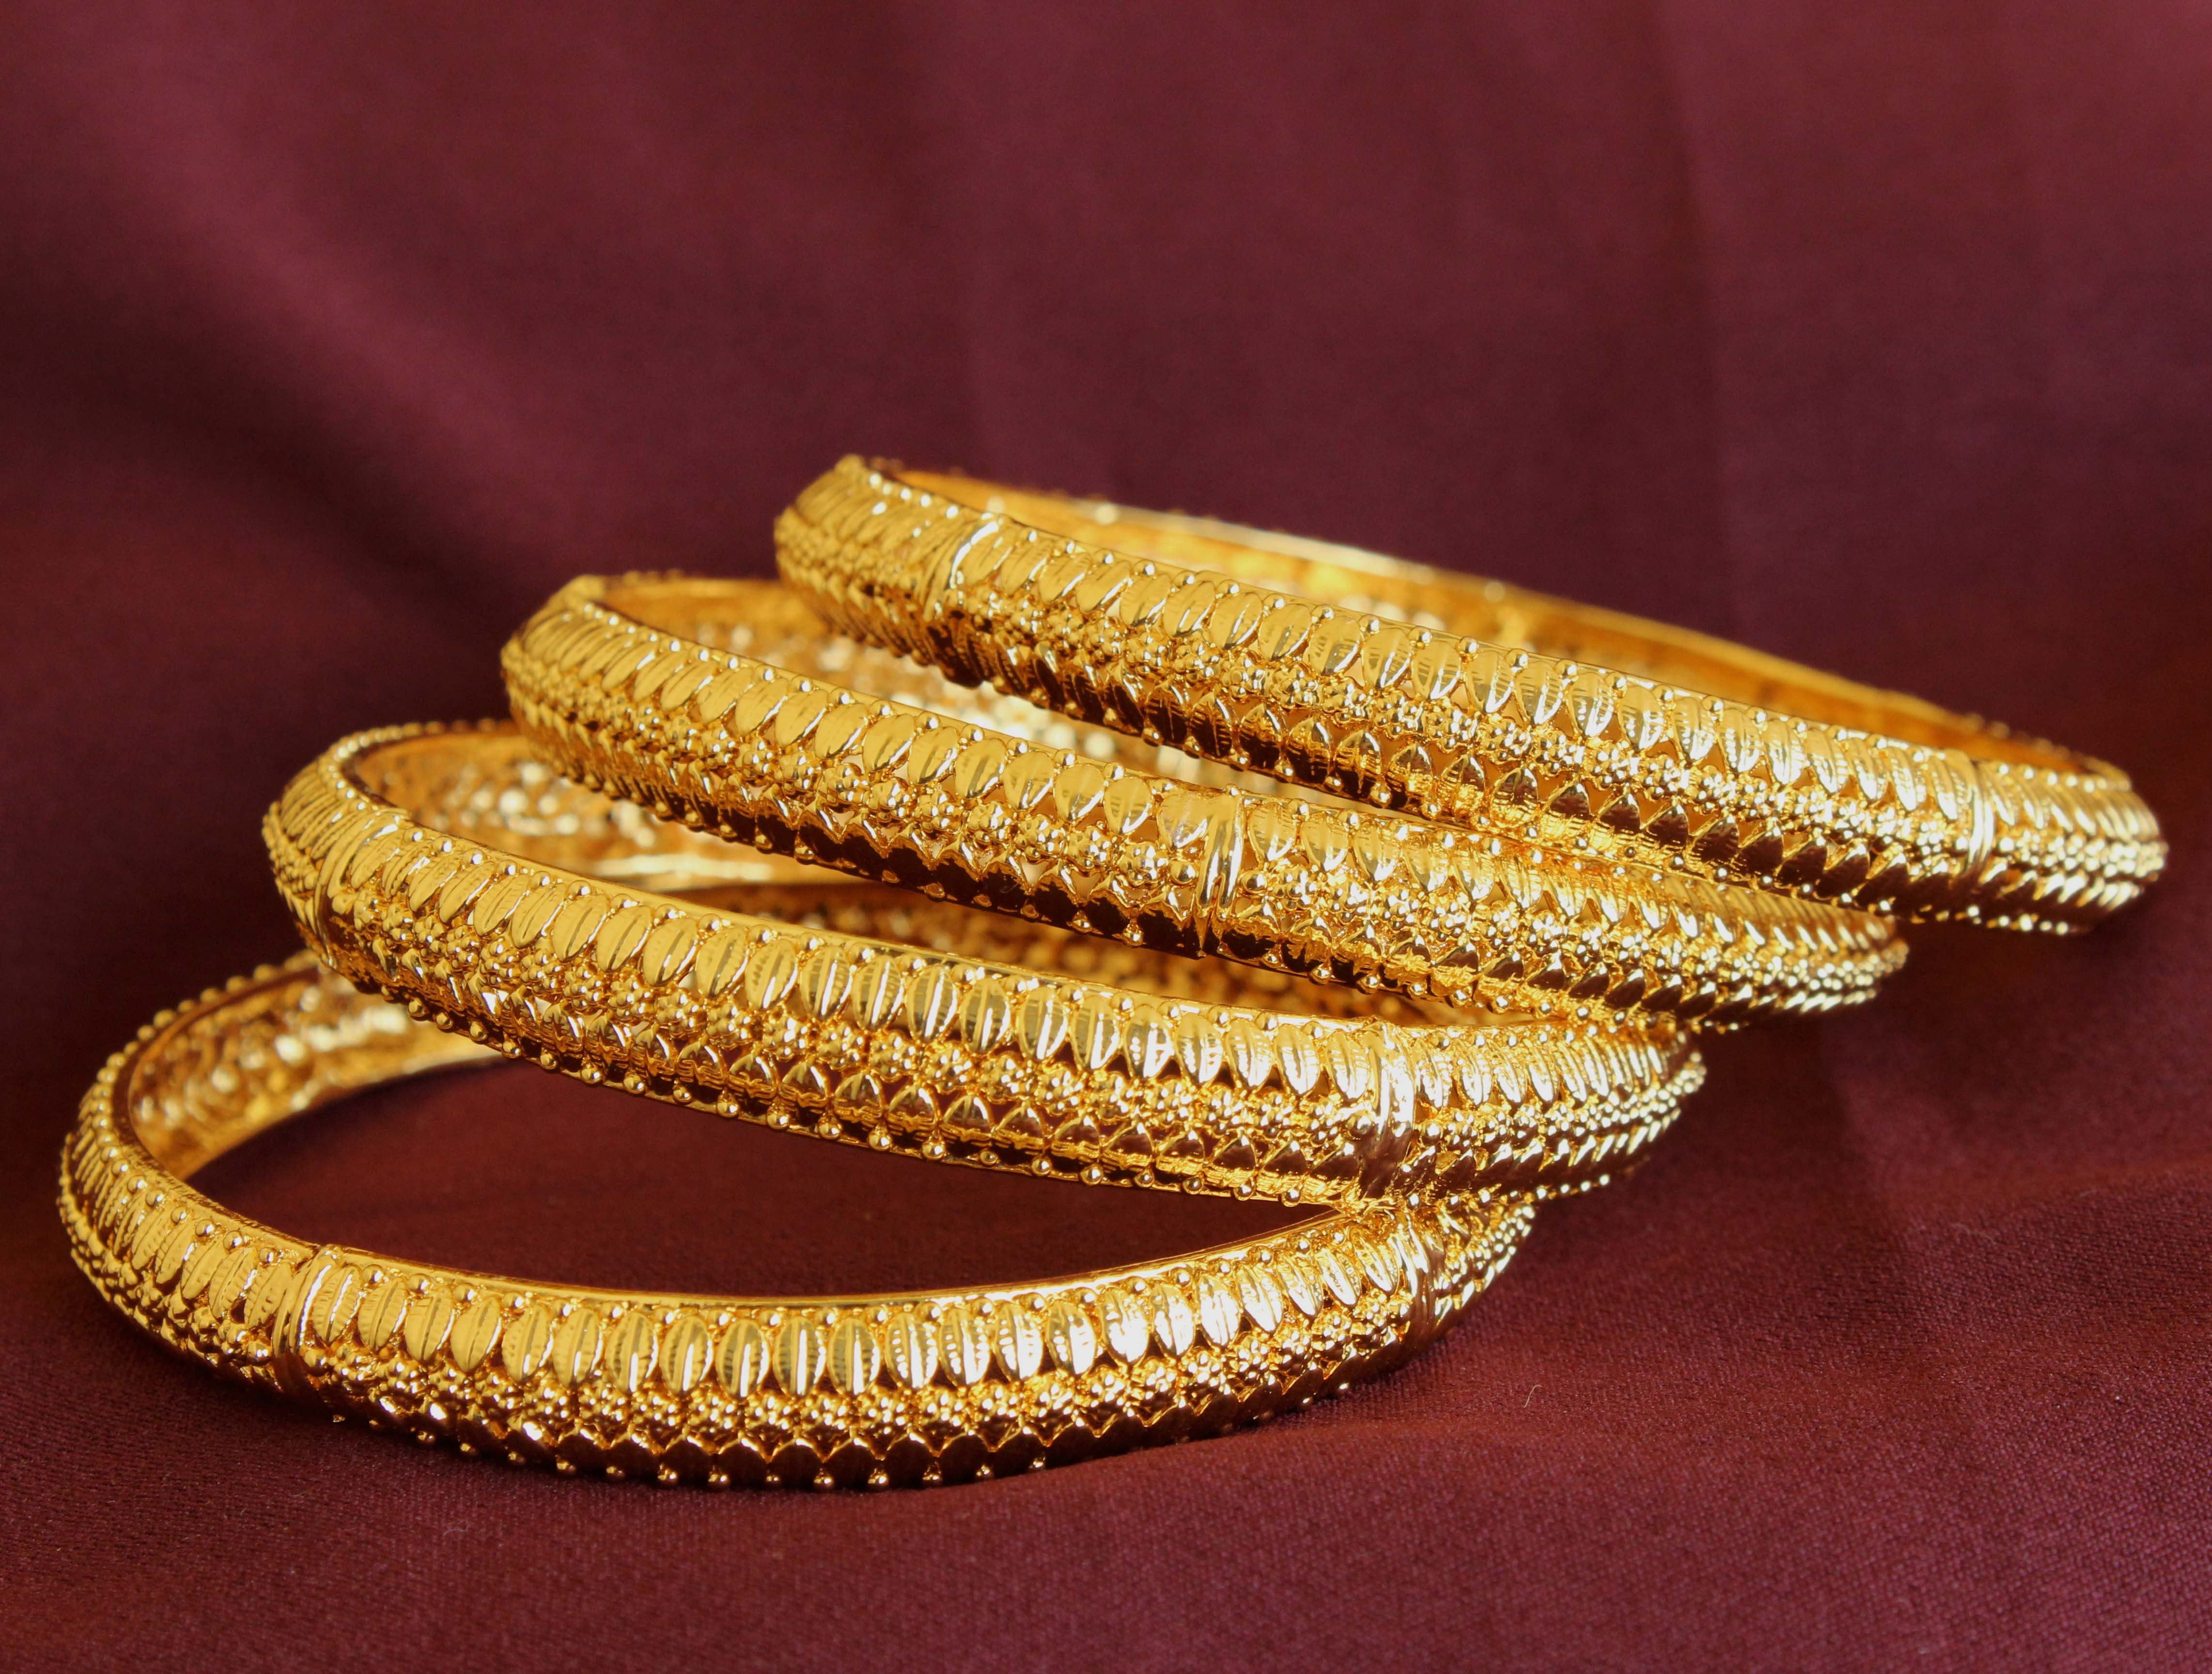 24KT Pure Gold Coated with Diamond Studded Pair of Bangles at Amazing Price